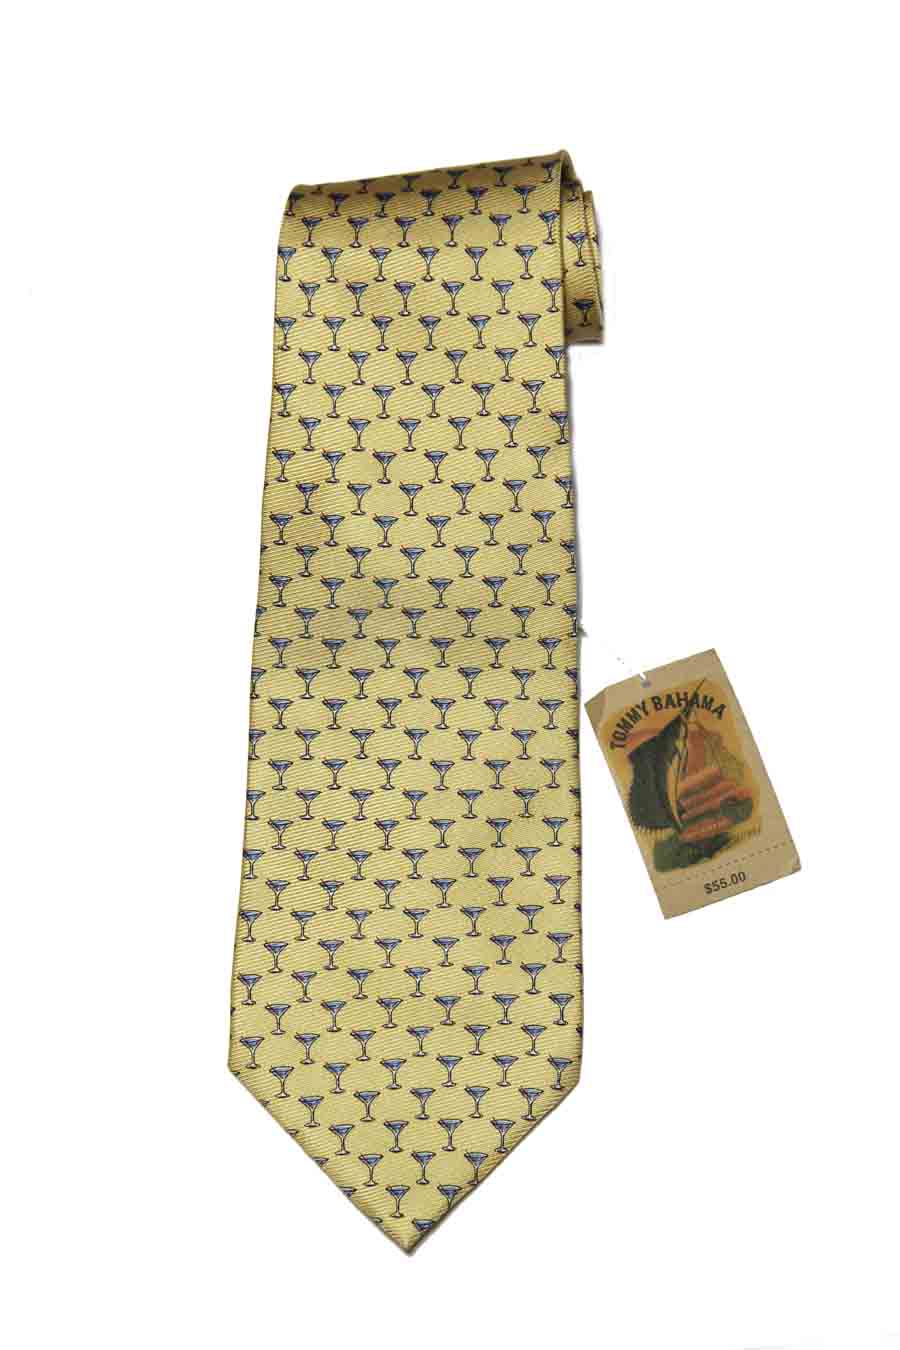 Tommy Bahama Silk Tie Martini Glass Pattern Yellow Blue Red Men's